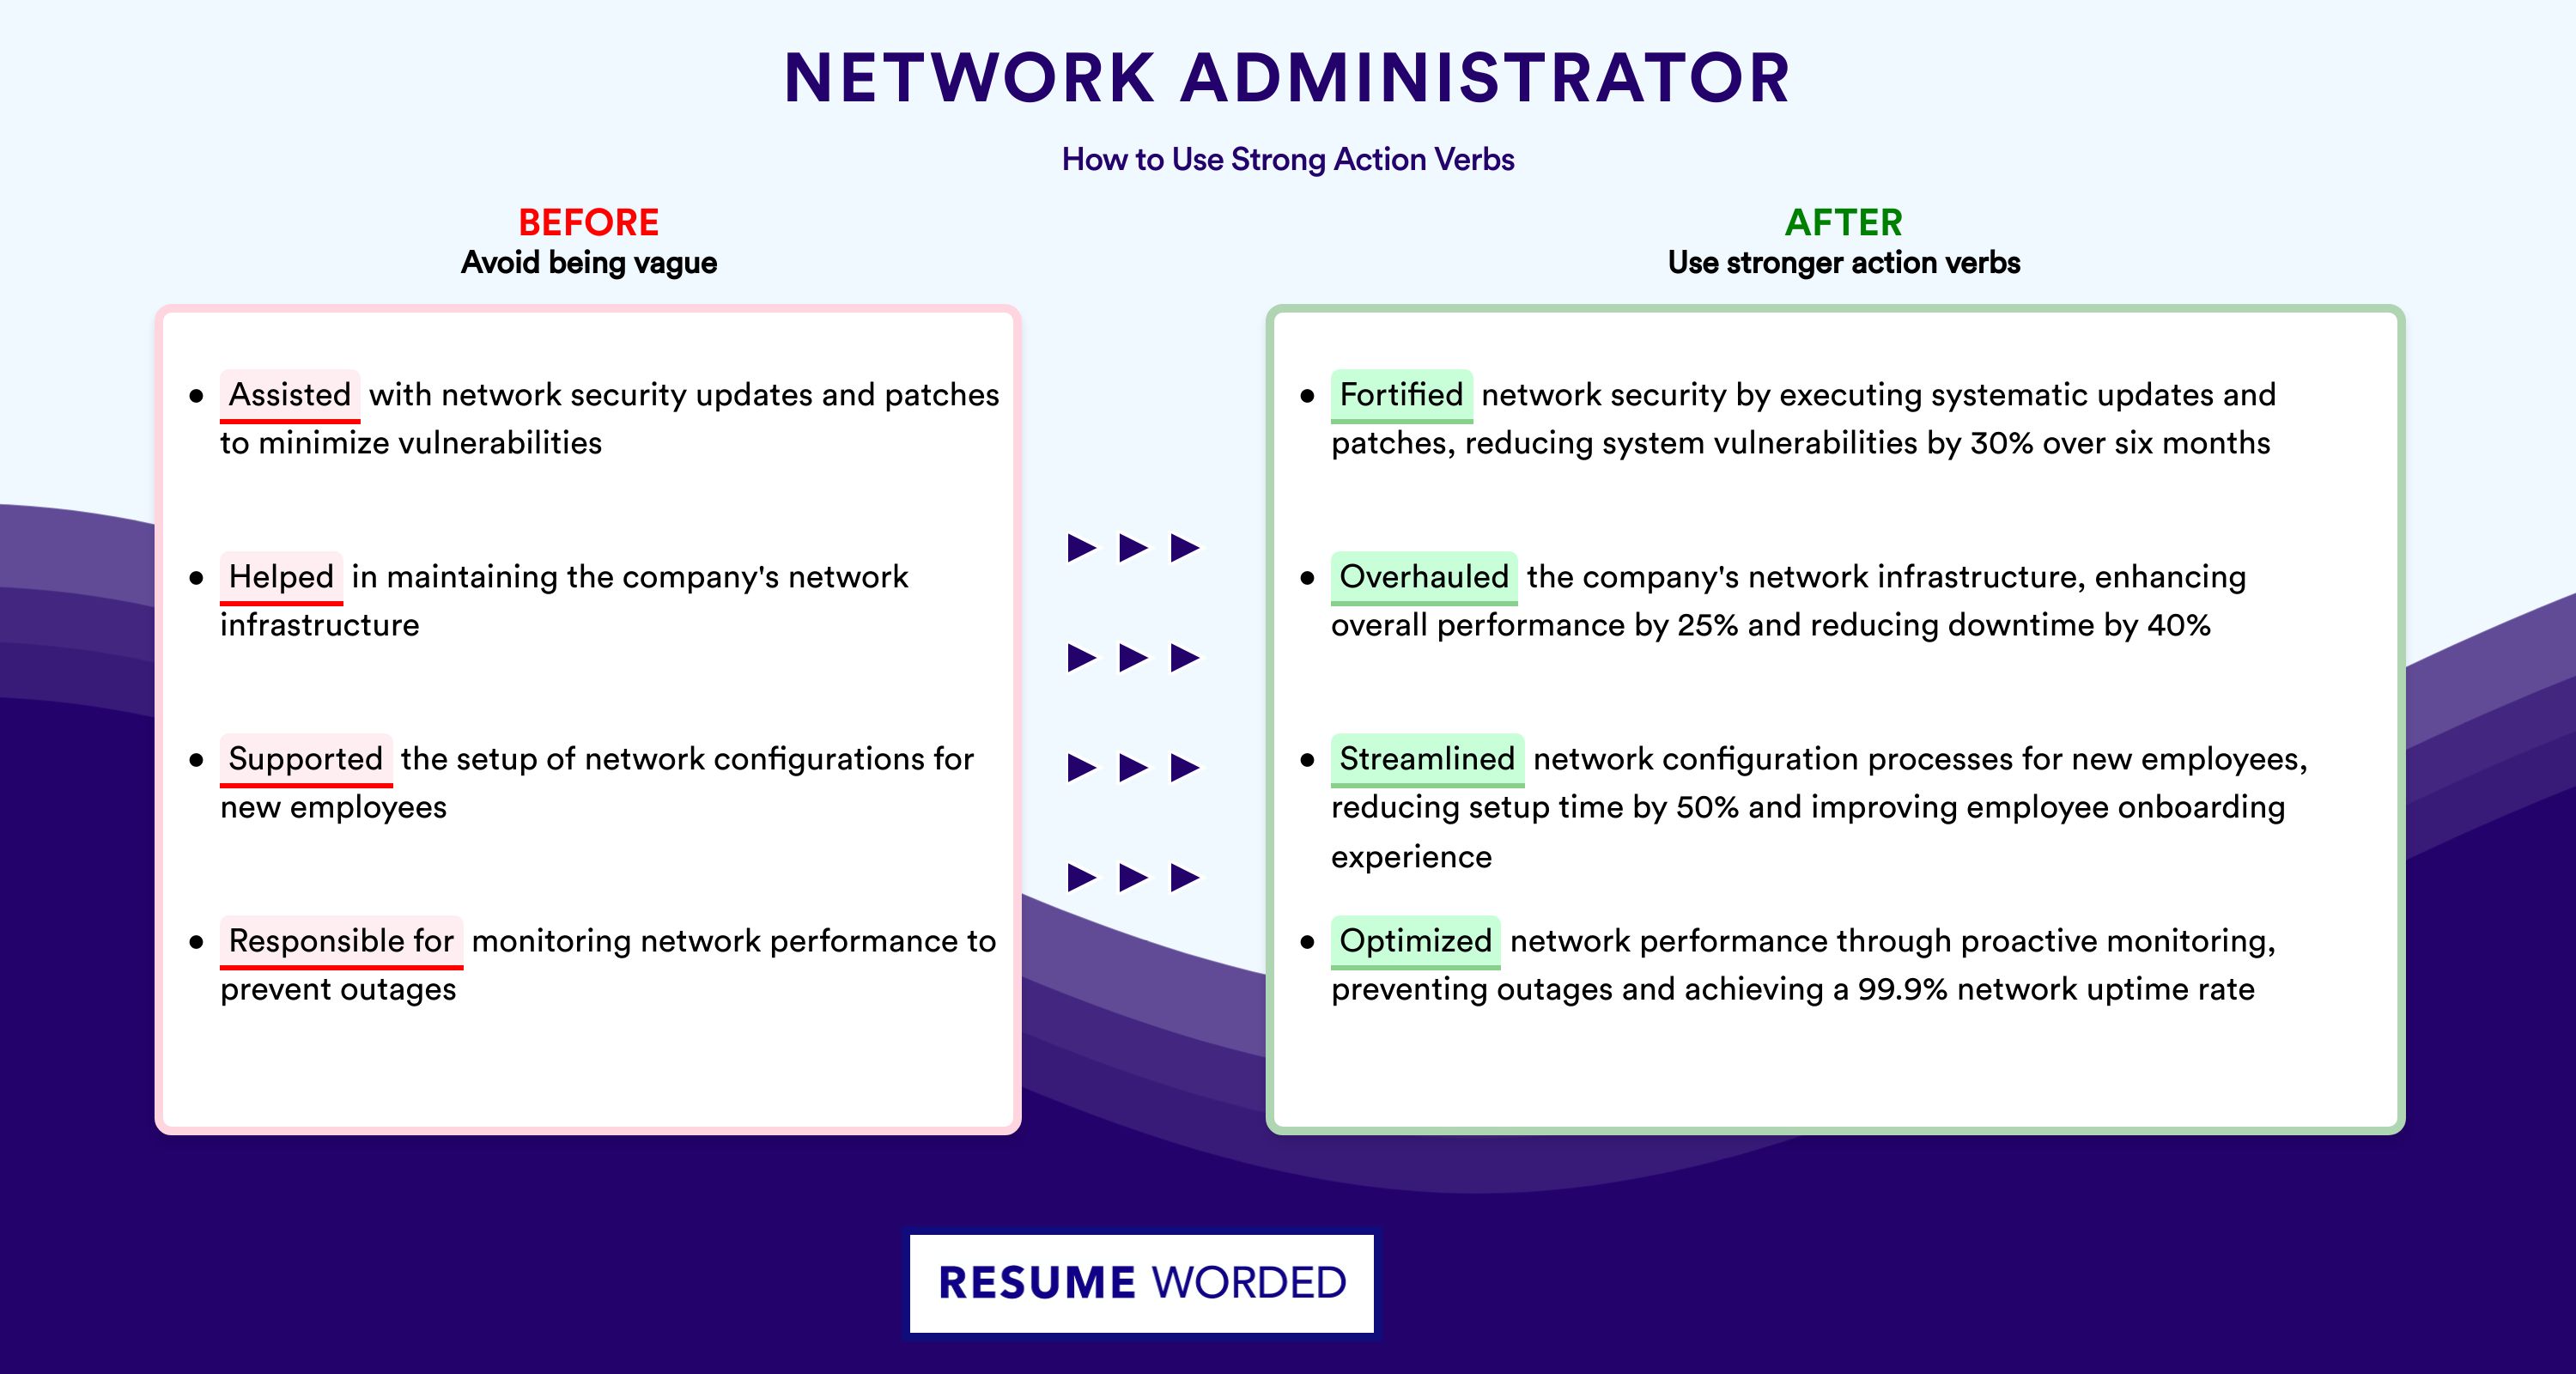 Action Verbs for Network Administrator